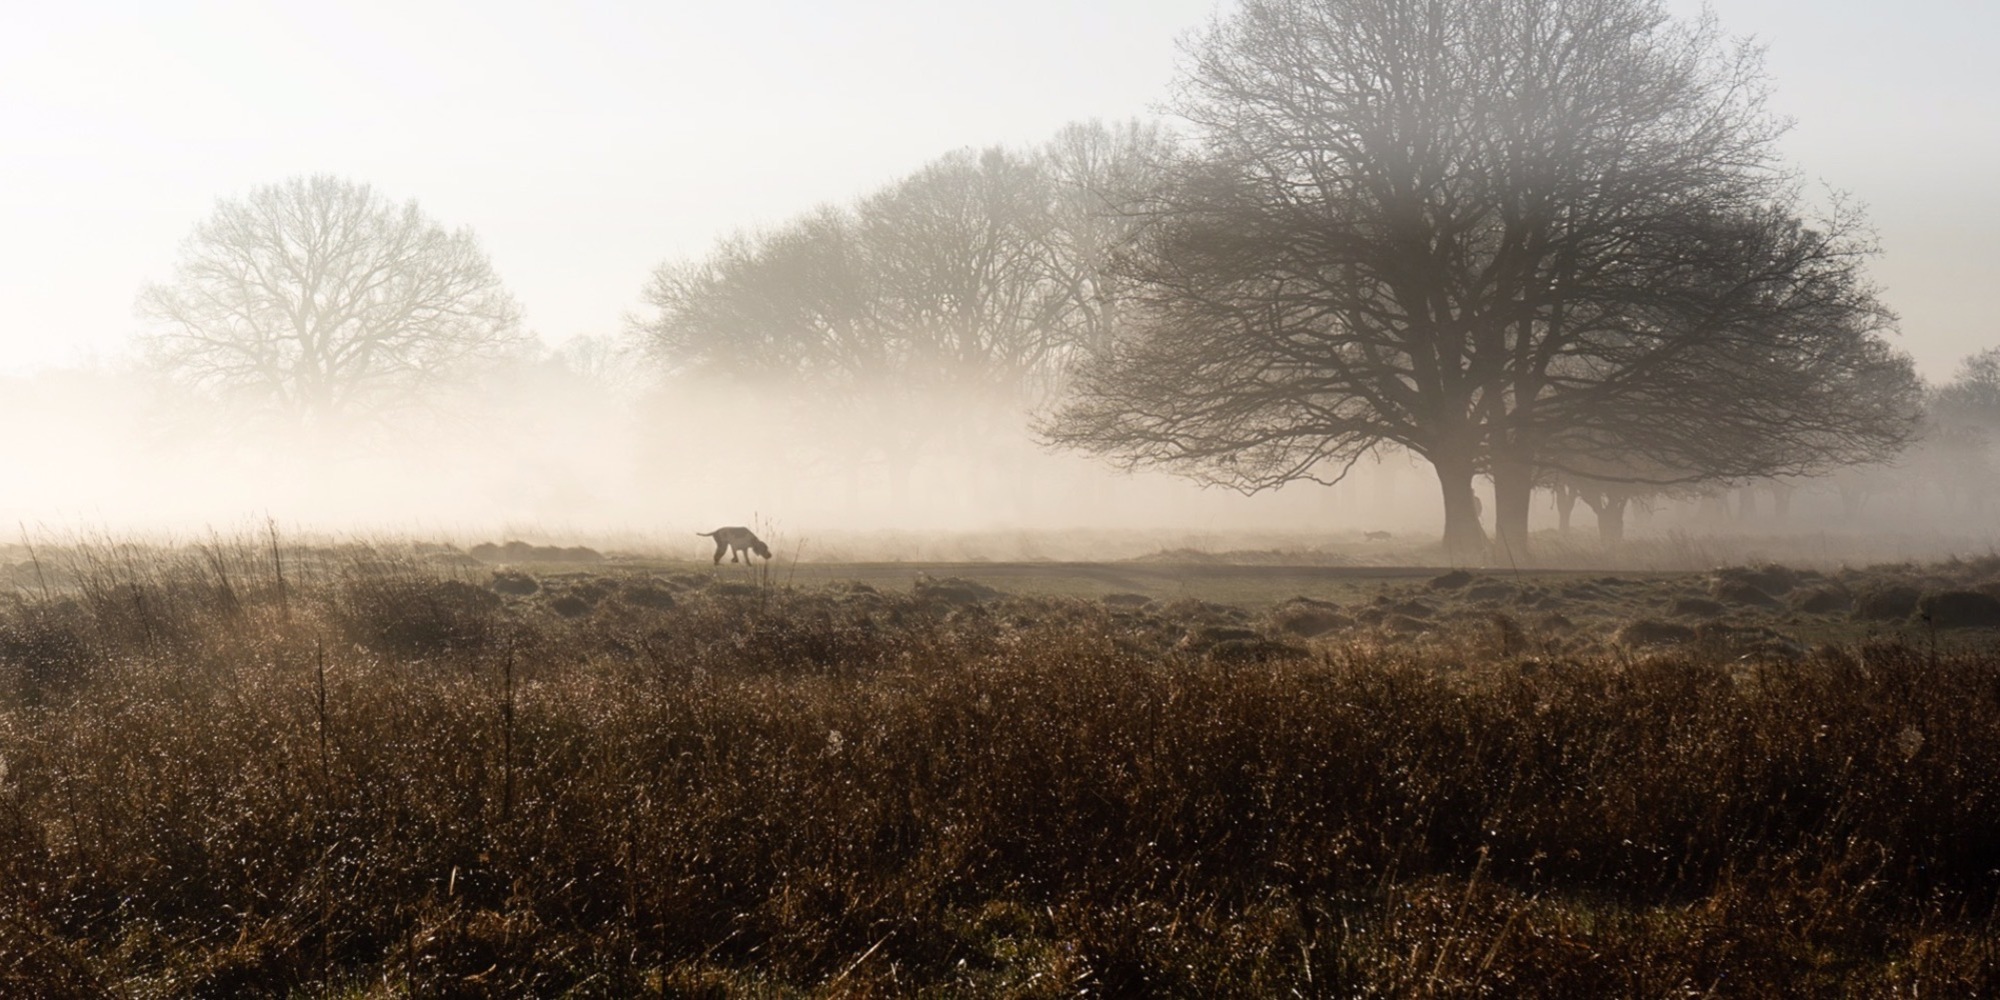 Image of the EJ dog walking in the mist